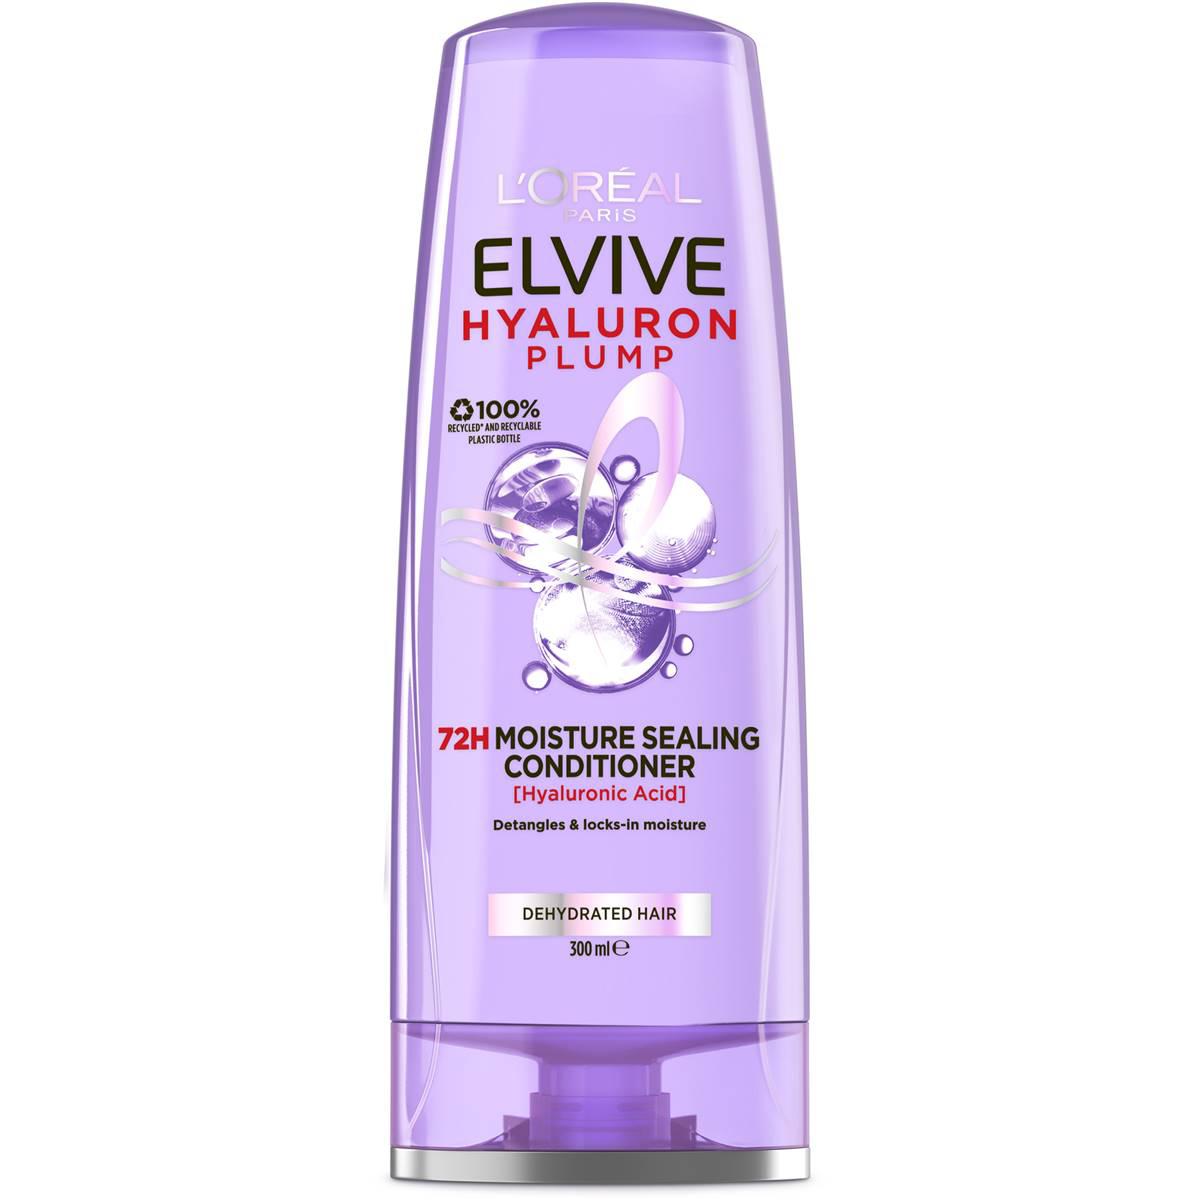 L'Oreal Elvive Hyaluron Plump Moisture Sealing Conditioner 300ml